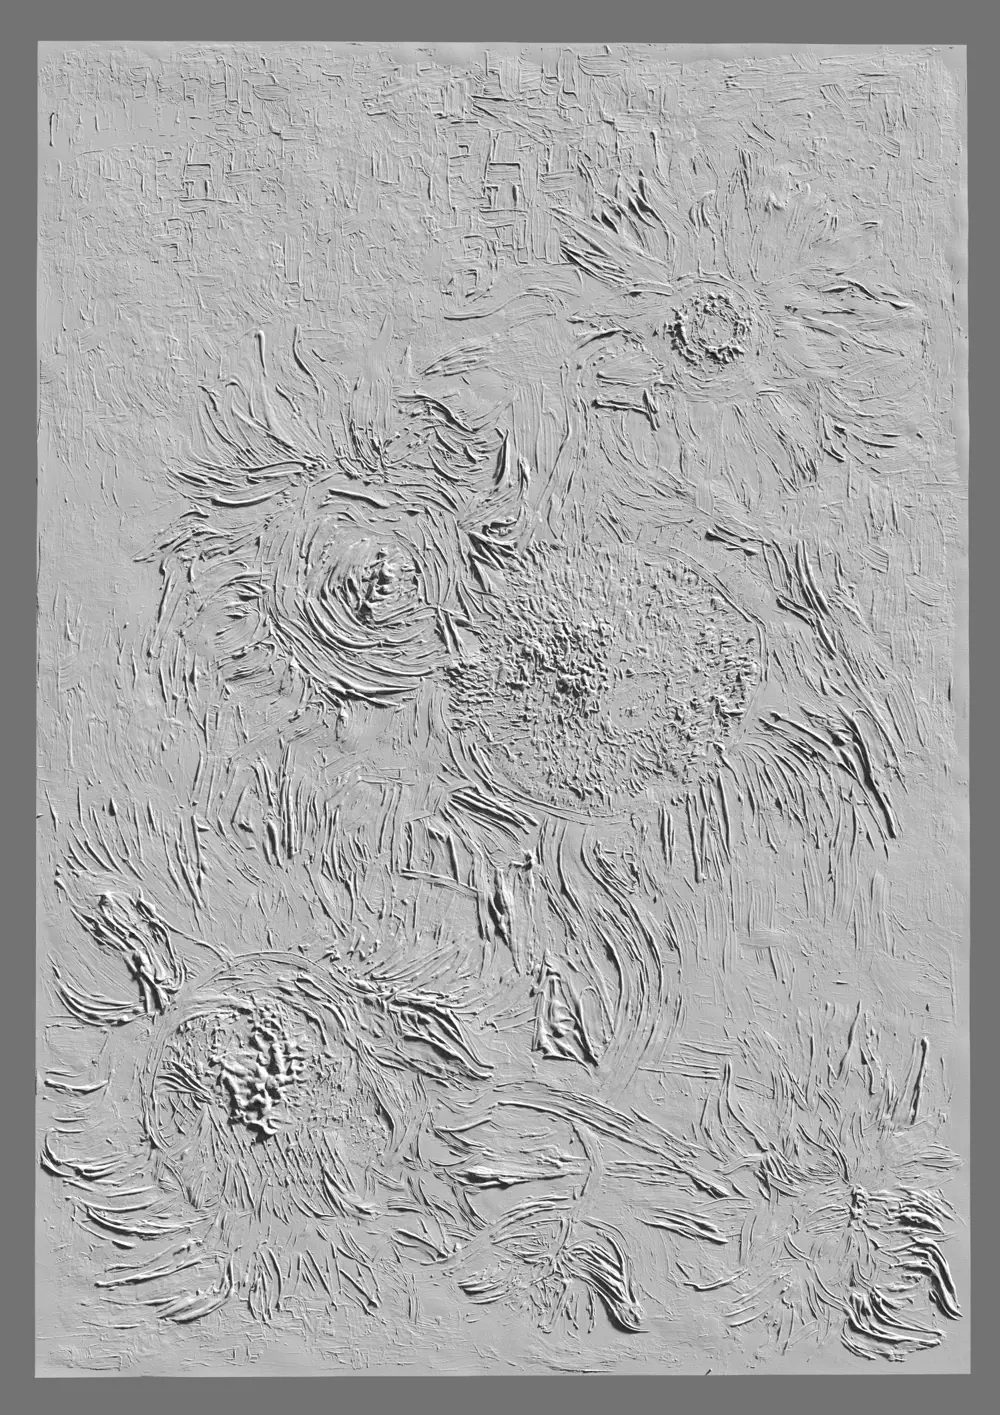 A black and white scan, showing the thick impasto texture of a Van Gogh sunflowers painting.